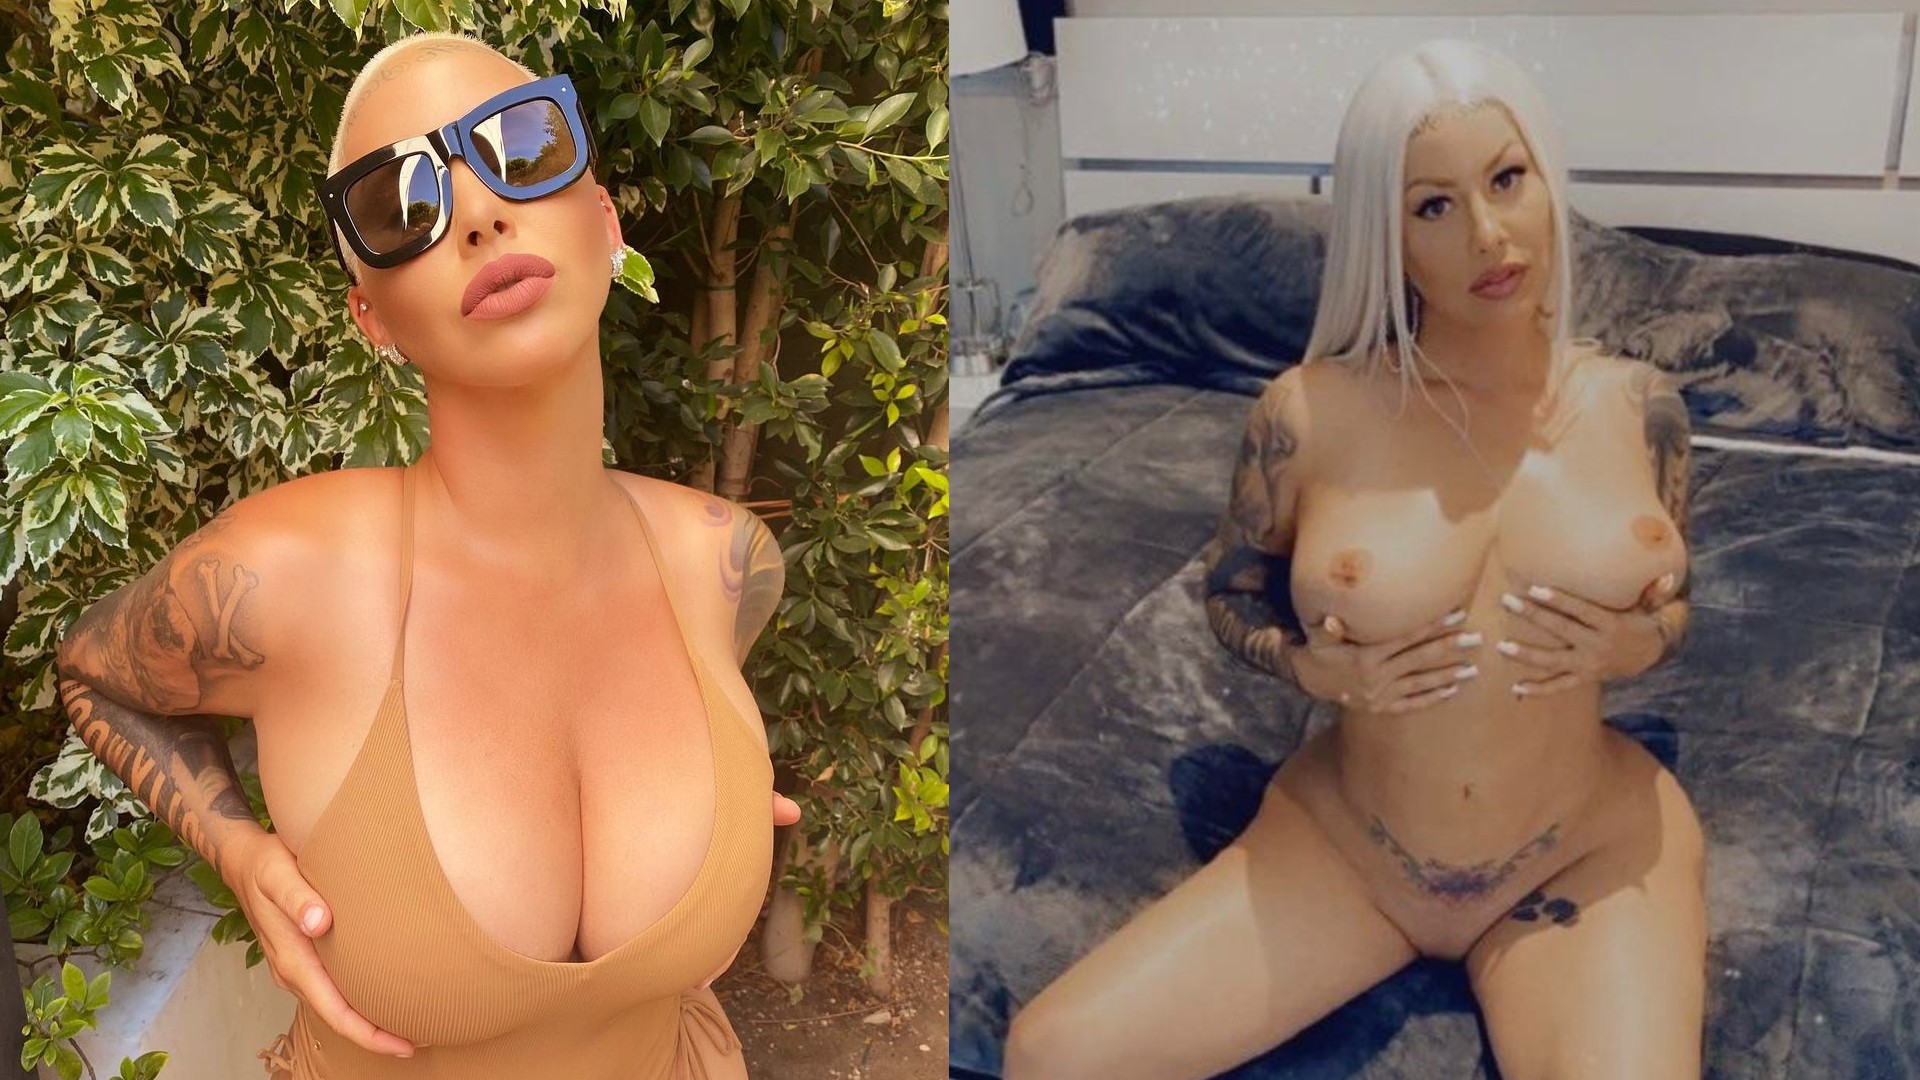 clarice joy recommends amber rose naked tits pic